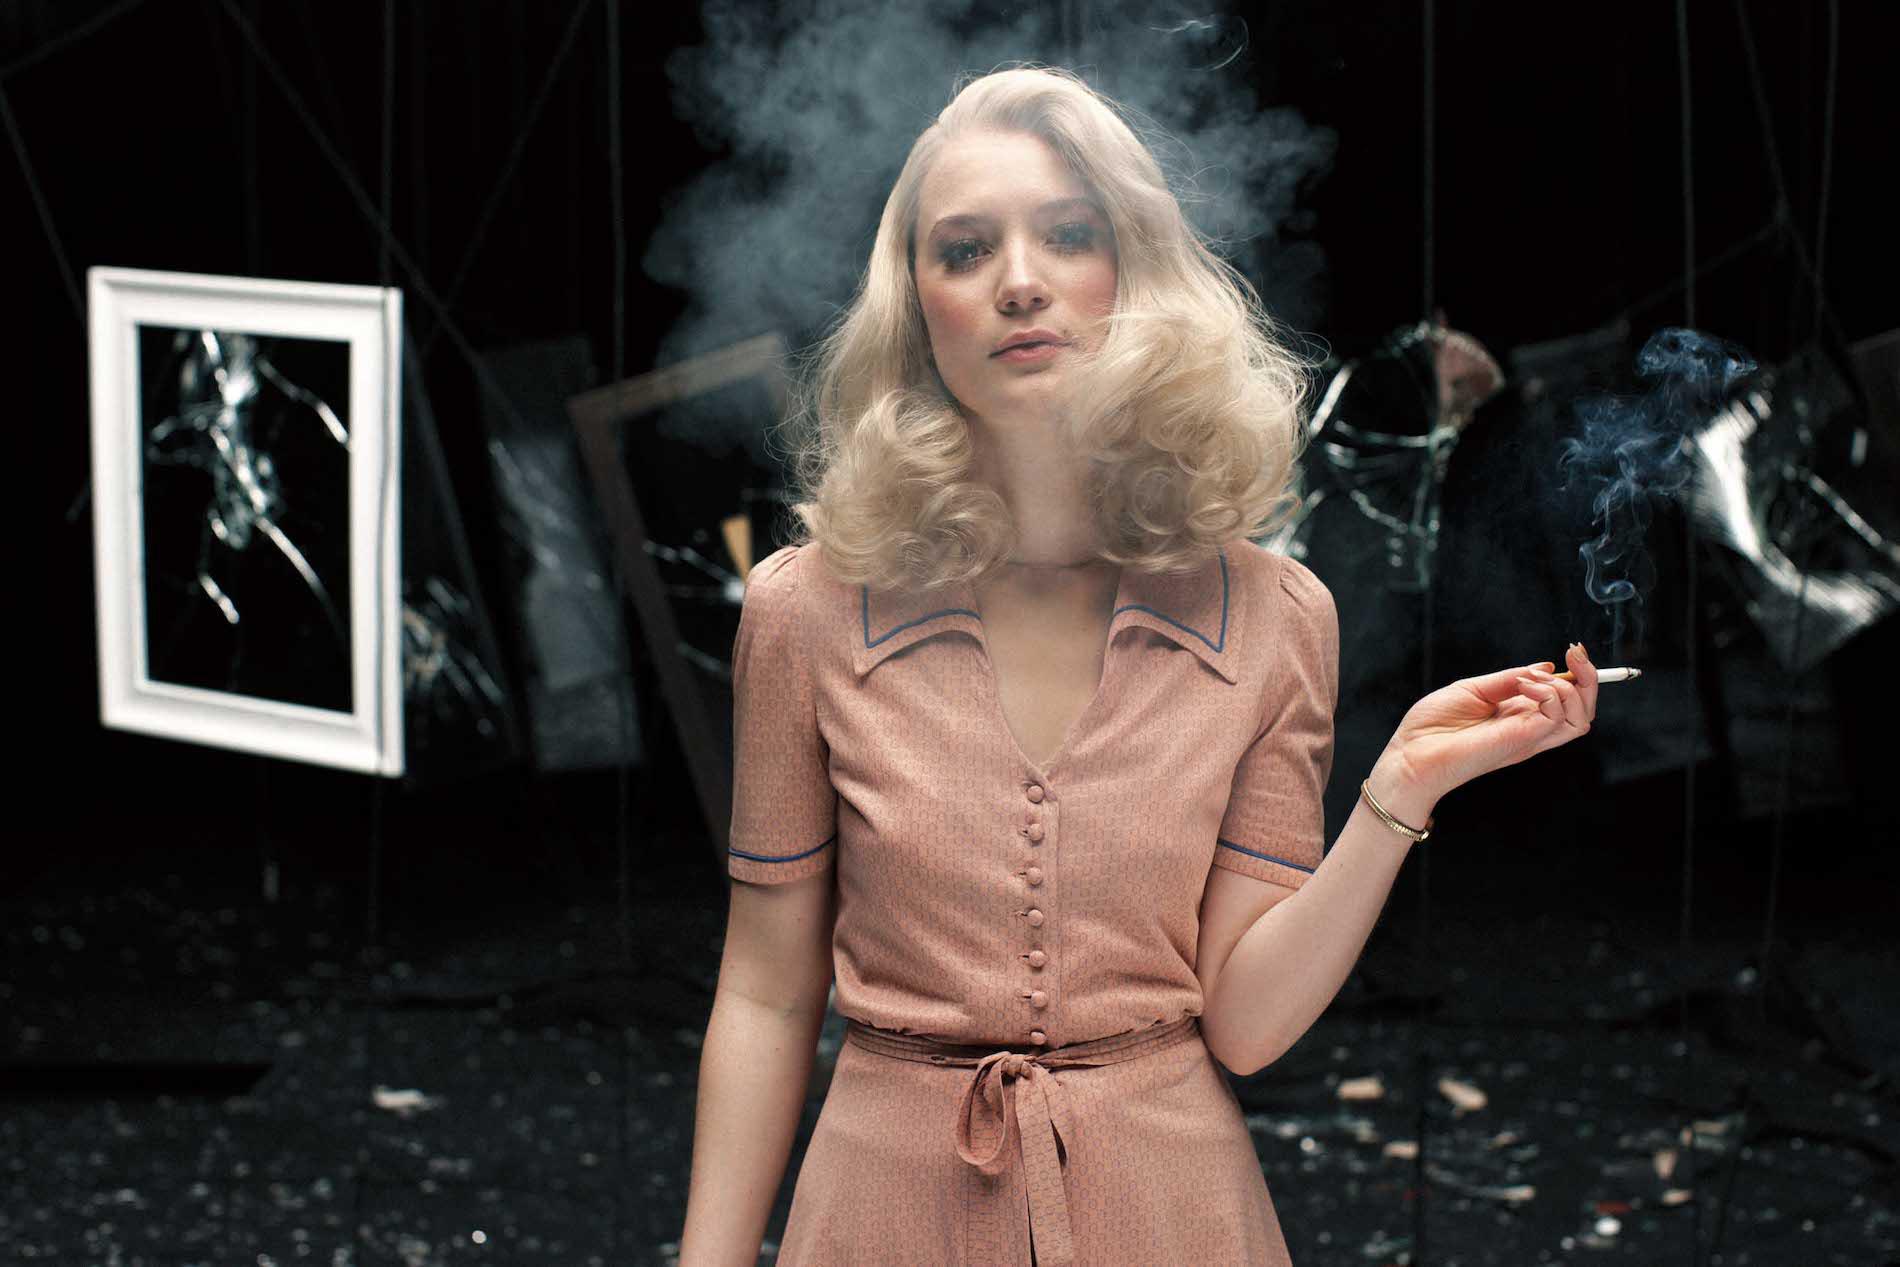 A blonde woman wearing a pink dress smoking a cigarette, smoke covering her face